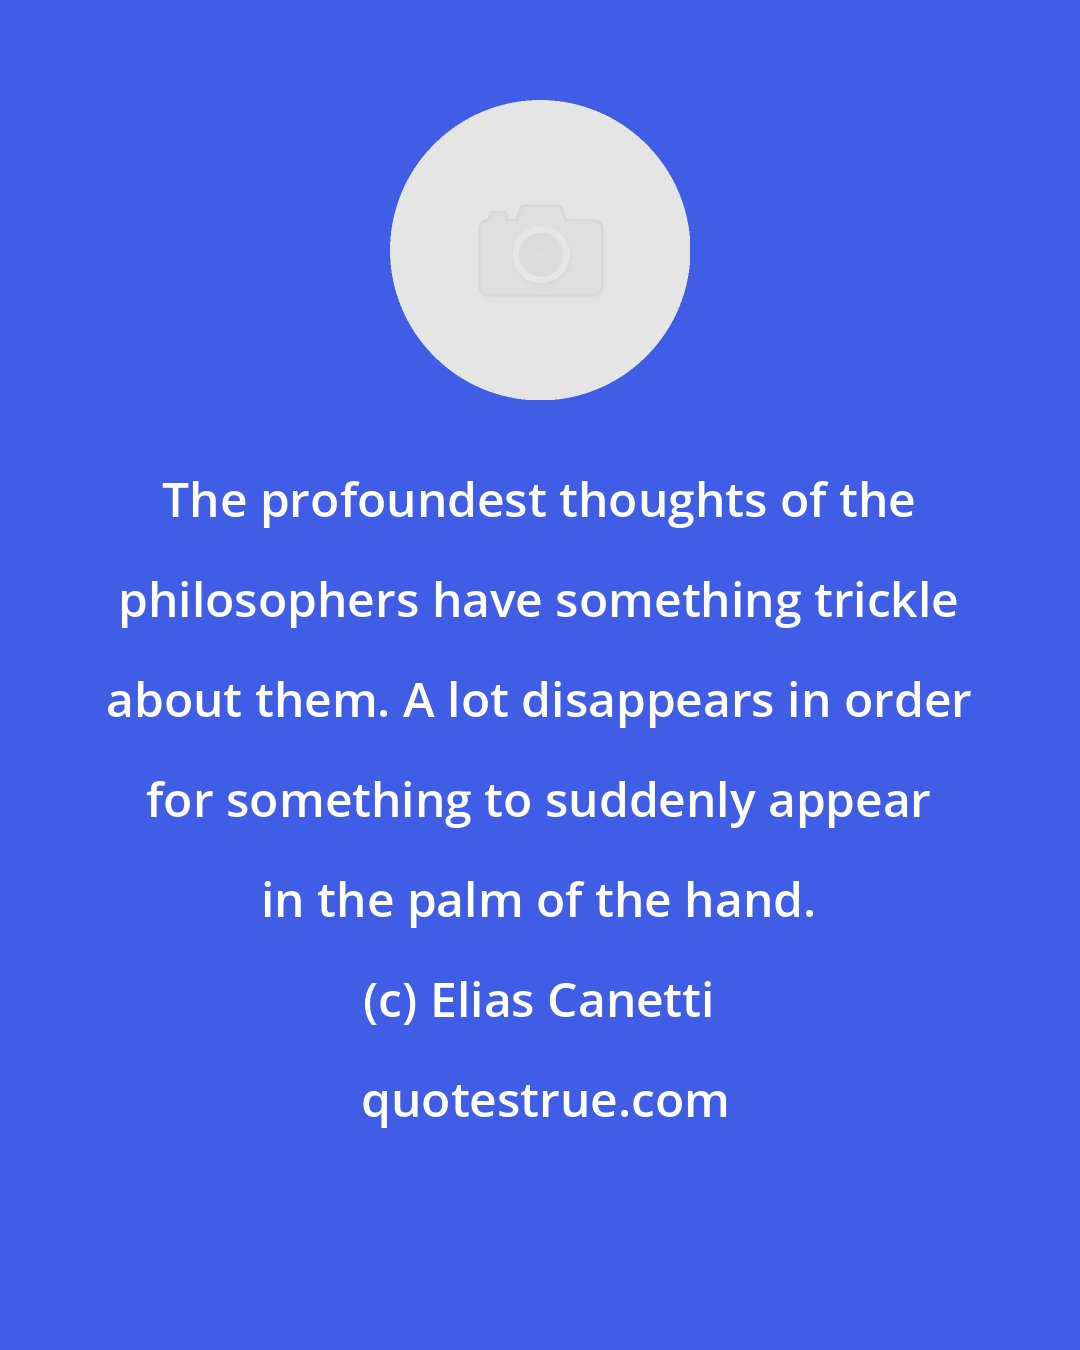 Elias Canetti: The profoundest thoughts of the philosophers have something trickle about them. A lot disappears in order for something to suddenly appear in the palm of the hand.